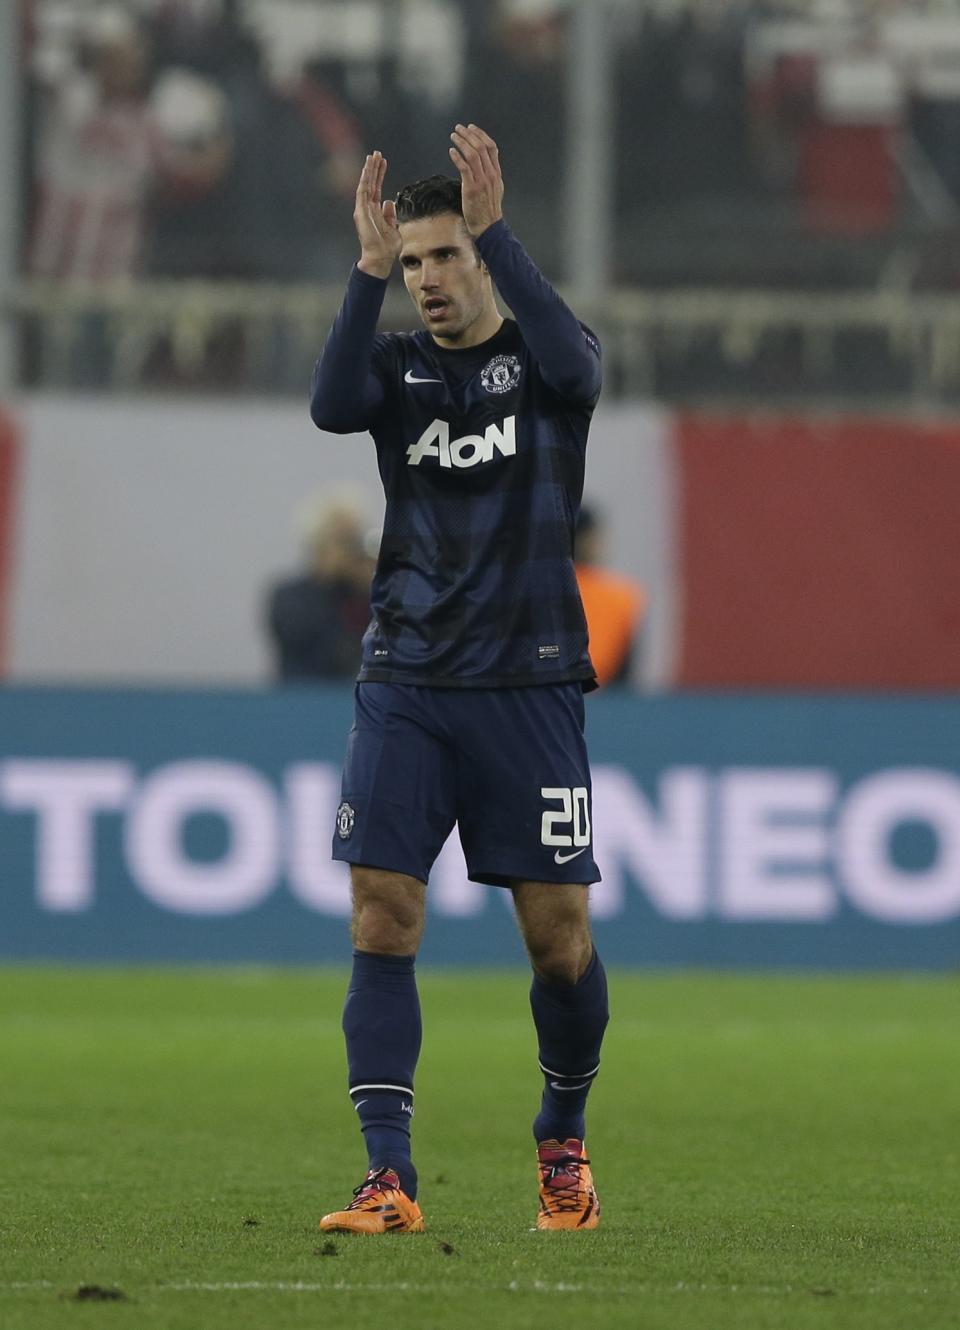 Manchester United's Robin van Persie applauds the fans of his team after a Champions League, round of 16, first leg soccer match against Olympiakos at Georgios Karaiskakis stadium, in Piraeus port, near Athens, on Tuesday, Feb. 25, 2014. Olympiakos won 2-0. (AP Photo/Thanassis Stavrakis)